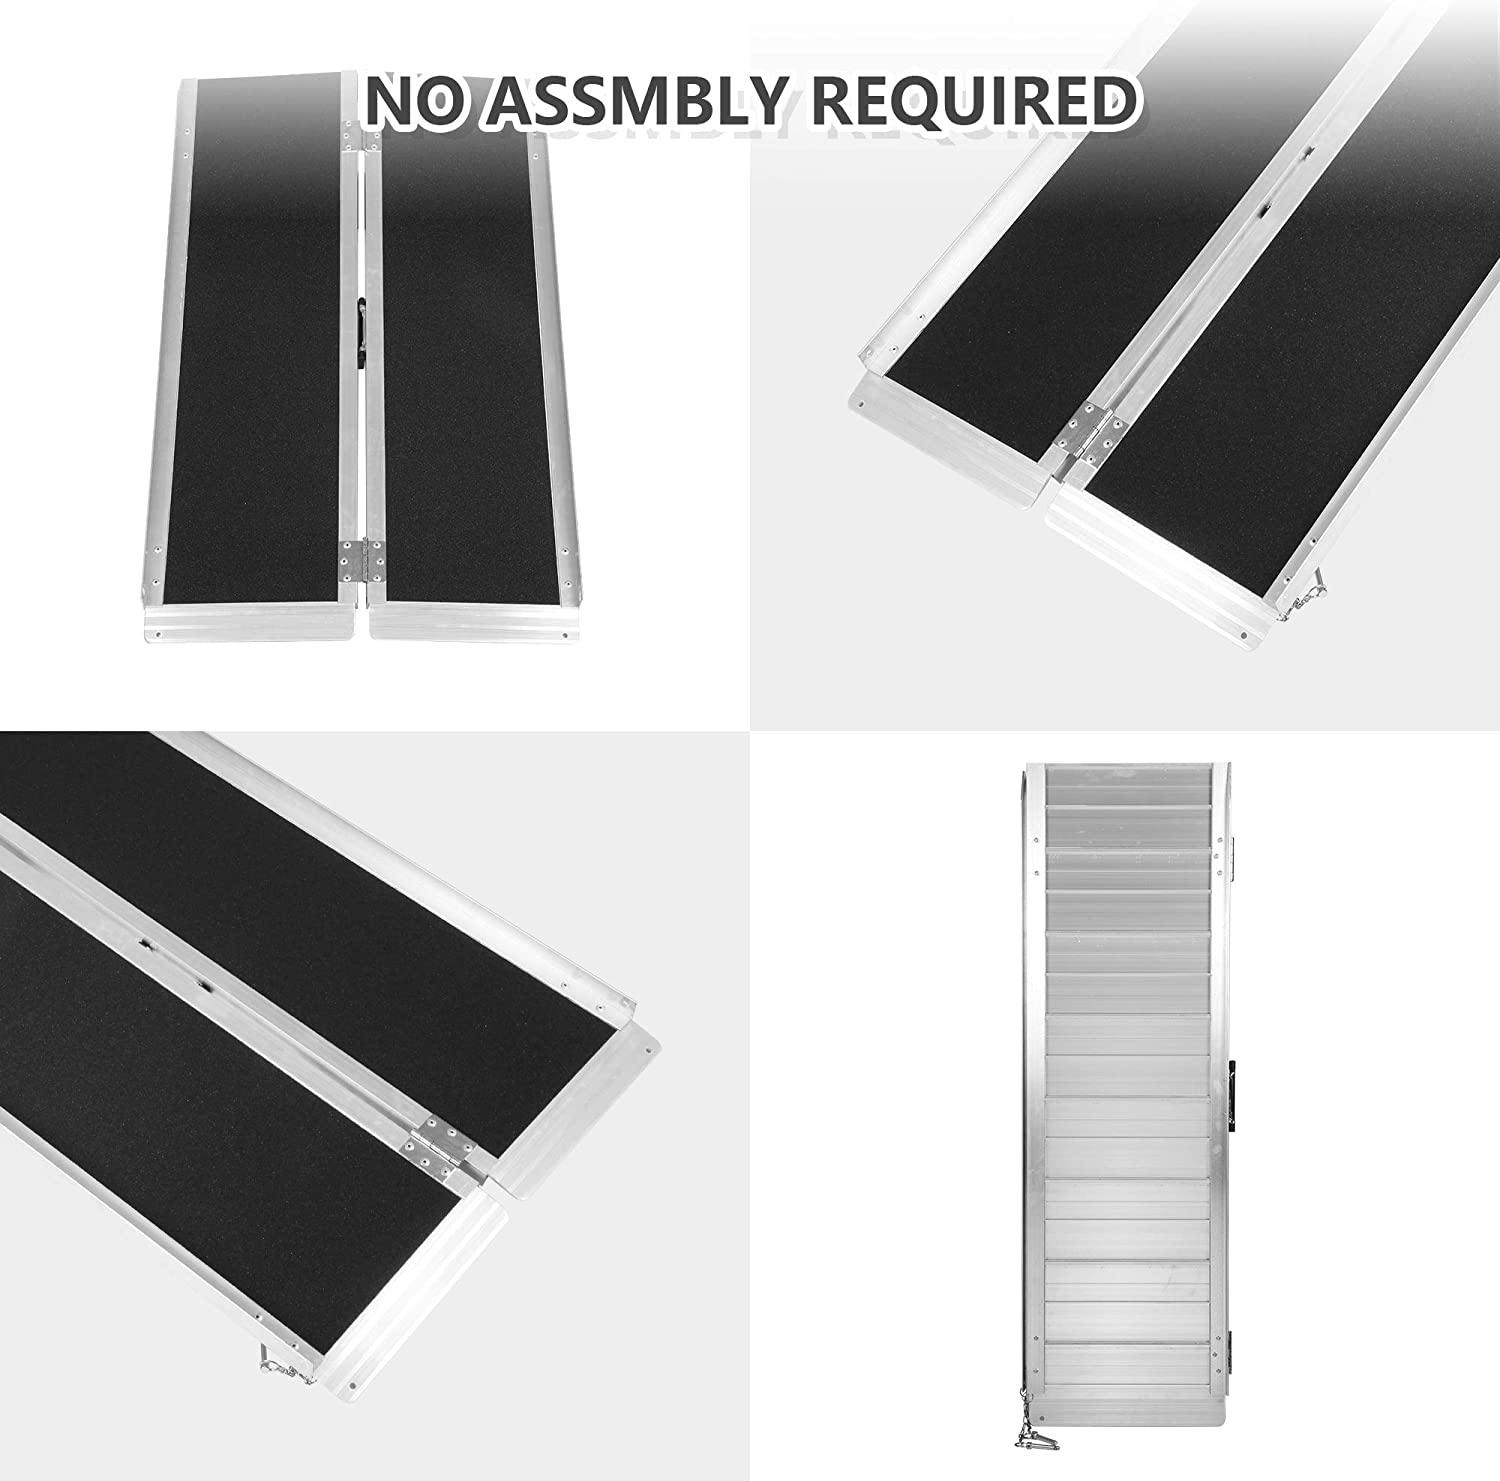 4Ft Portable Wheelchair Ramp Aluminum(26.5LBS), Lightweight And Easy To Transport, Single Fold Wheelchair Ramps, For Doorways, Stairs, Porch - Bosonshop